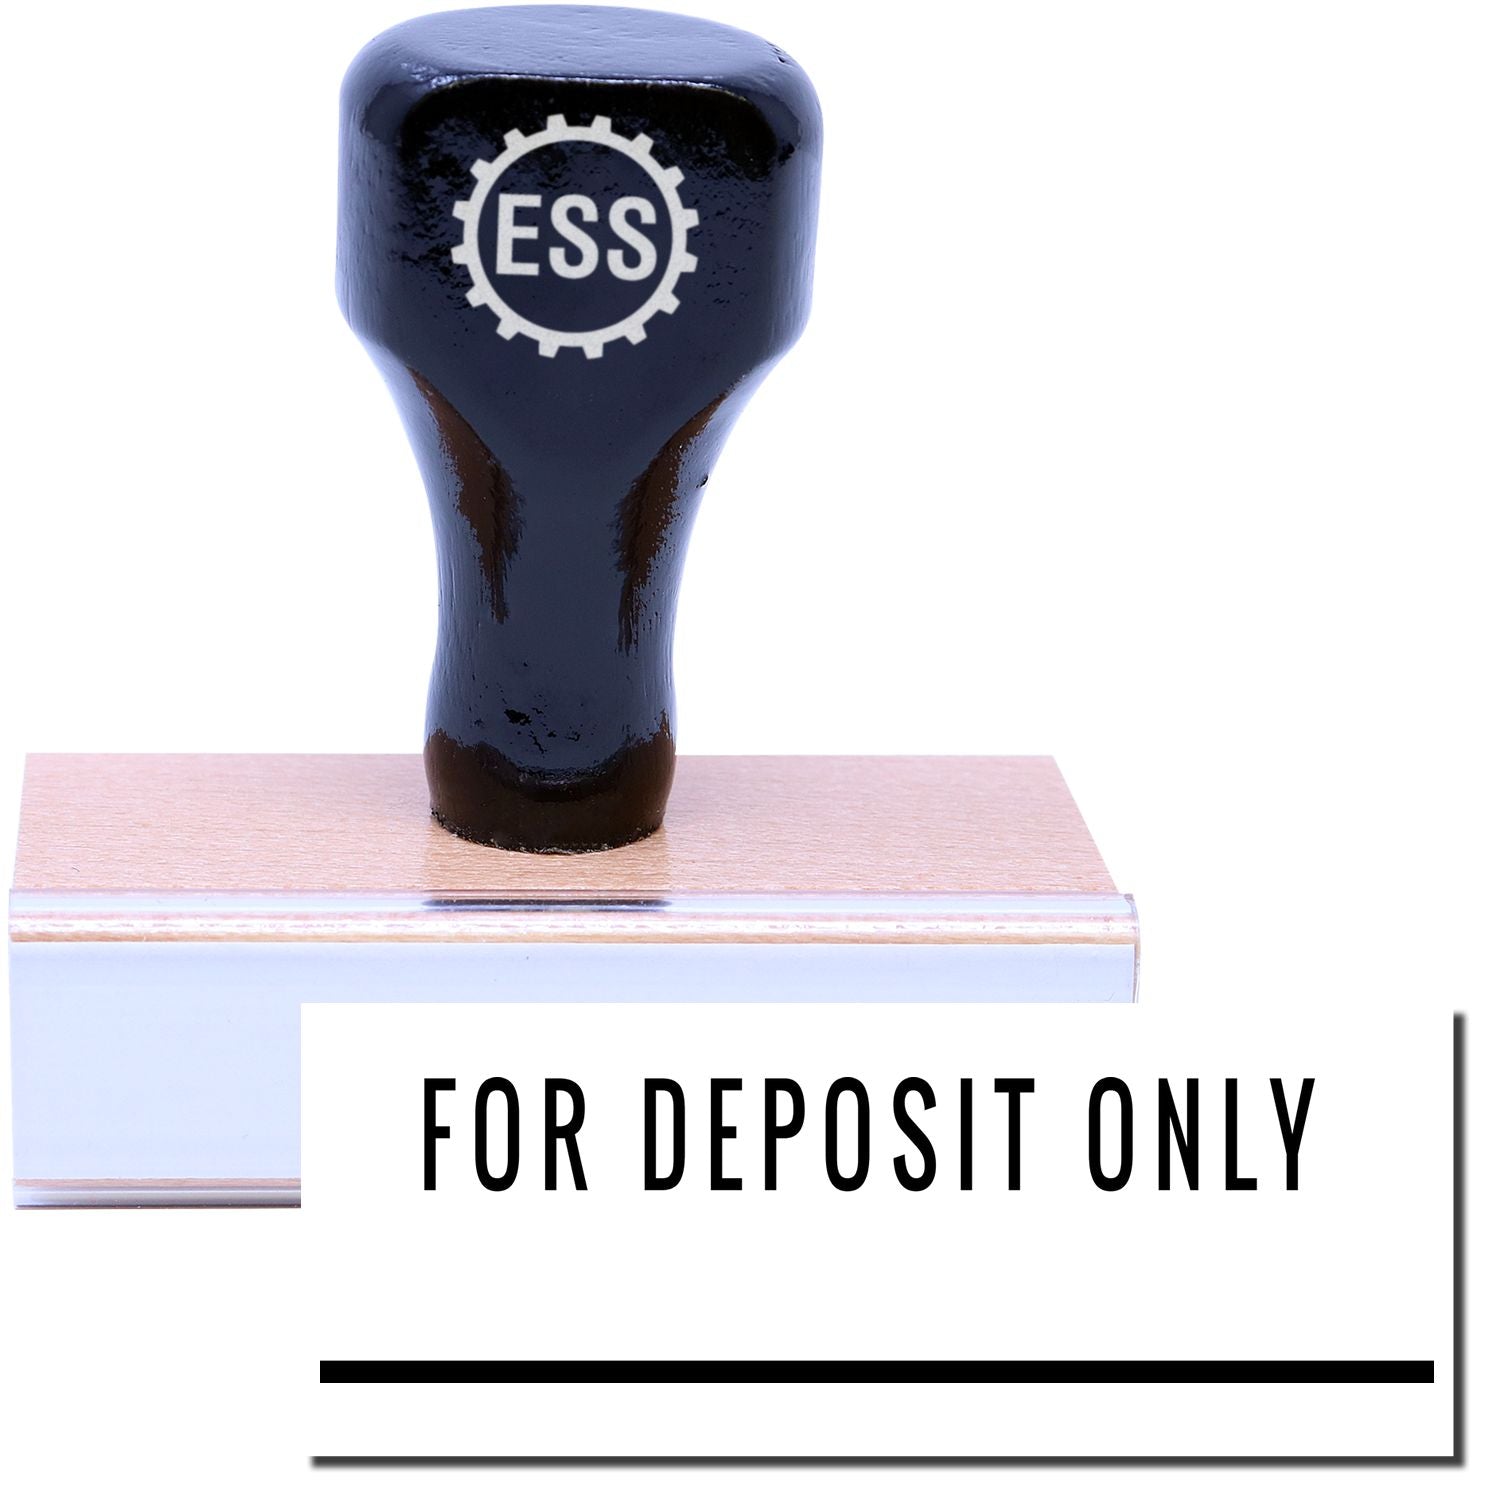 A stock office rubber stamp with a stamped image showing how the text "FOR DEPOSIT ONLY" with a line under the text is displayed after stamping.